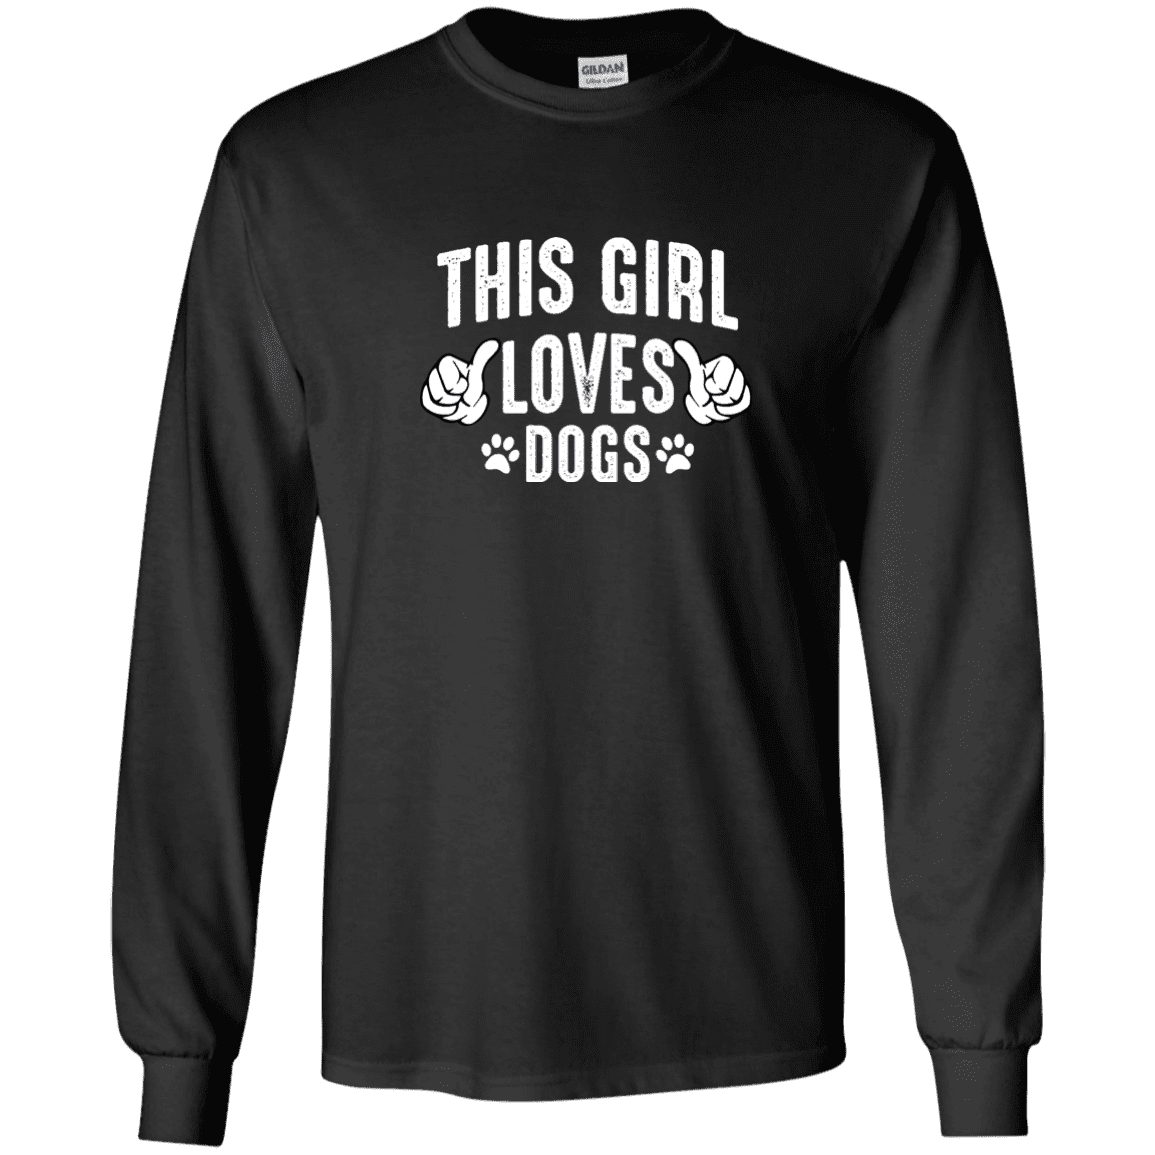 This Girl Loves Dogs - Long Sleeve T Shirt.